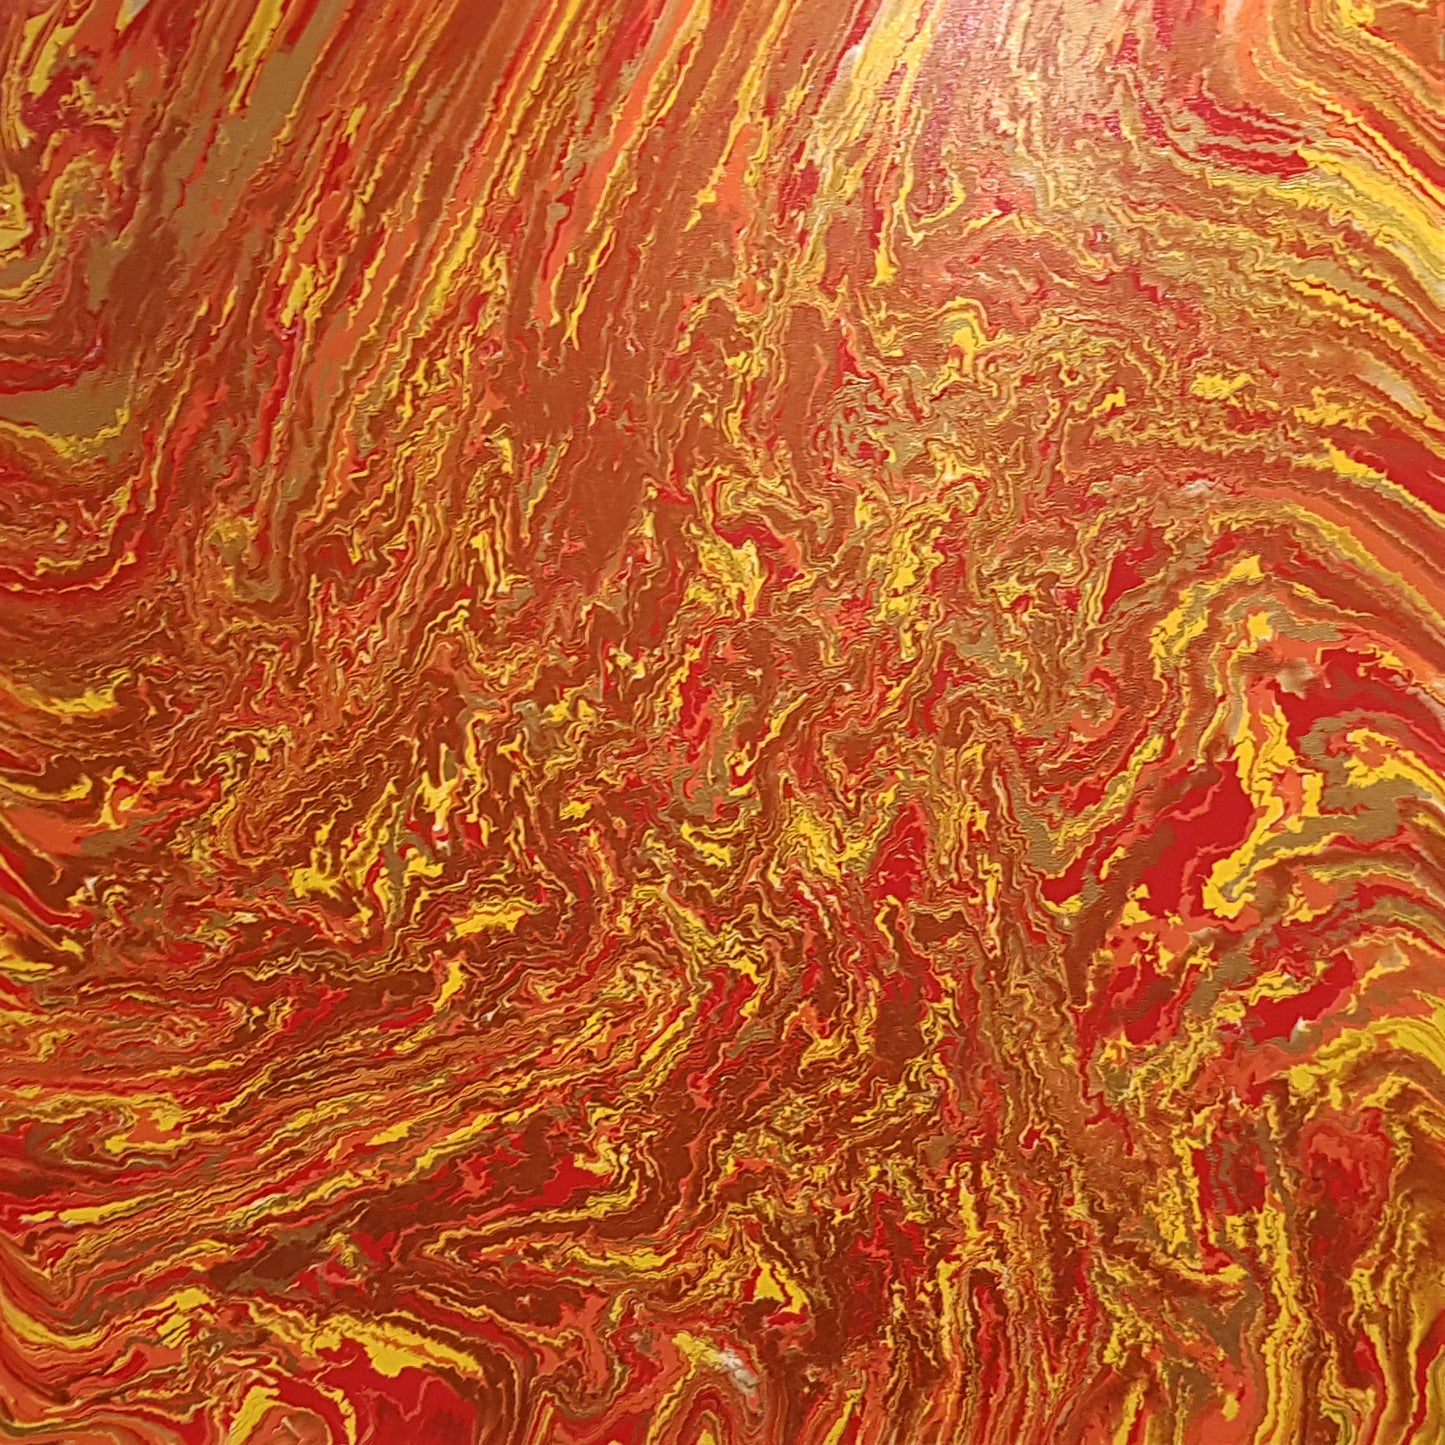 House-of-the-Rising-Sun-by-Alexandra-Romano-Original-Orange-Yellow-Red-Bronze-Copper-Gold-Abstract-Action-Painting-Colourful-Home-Decor